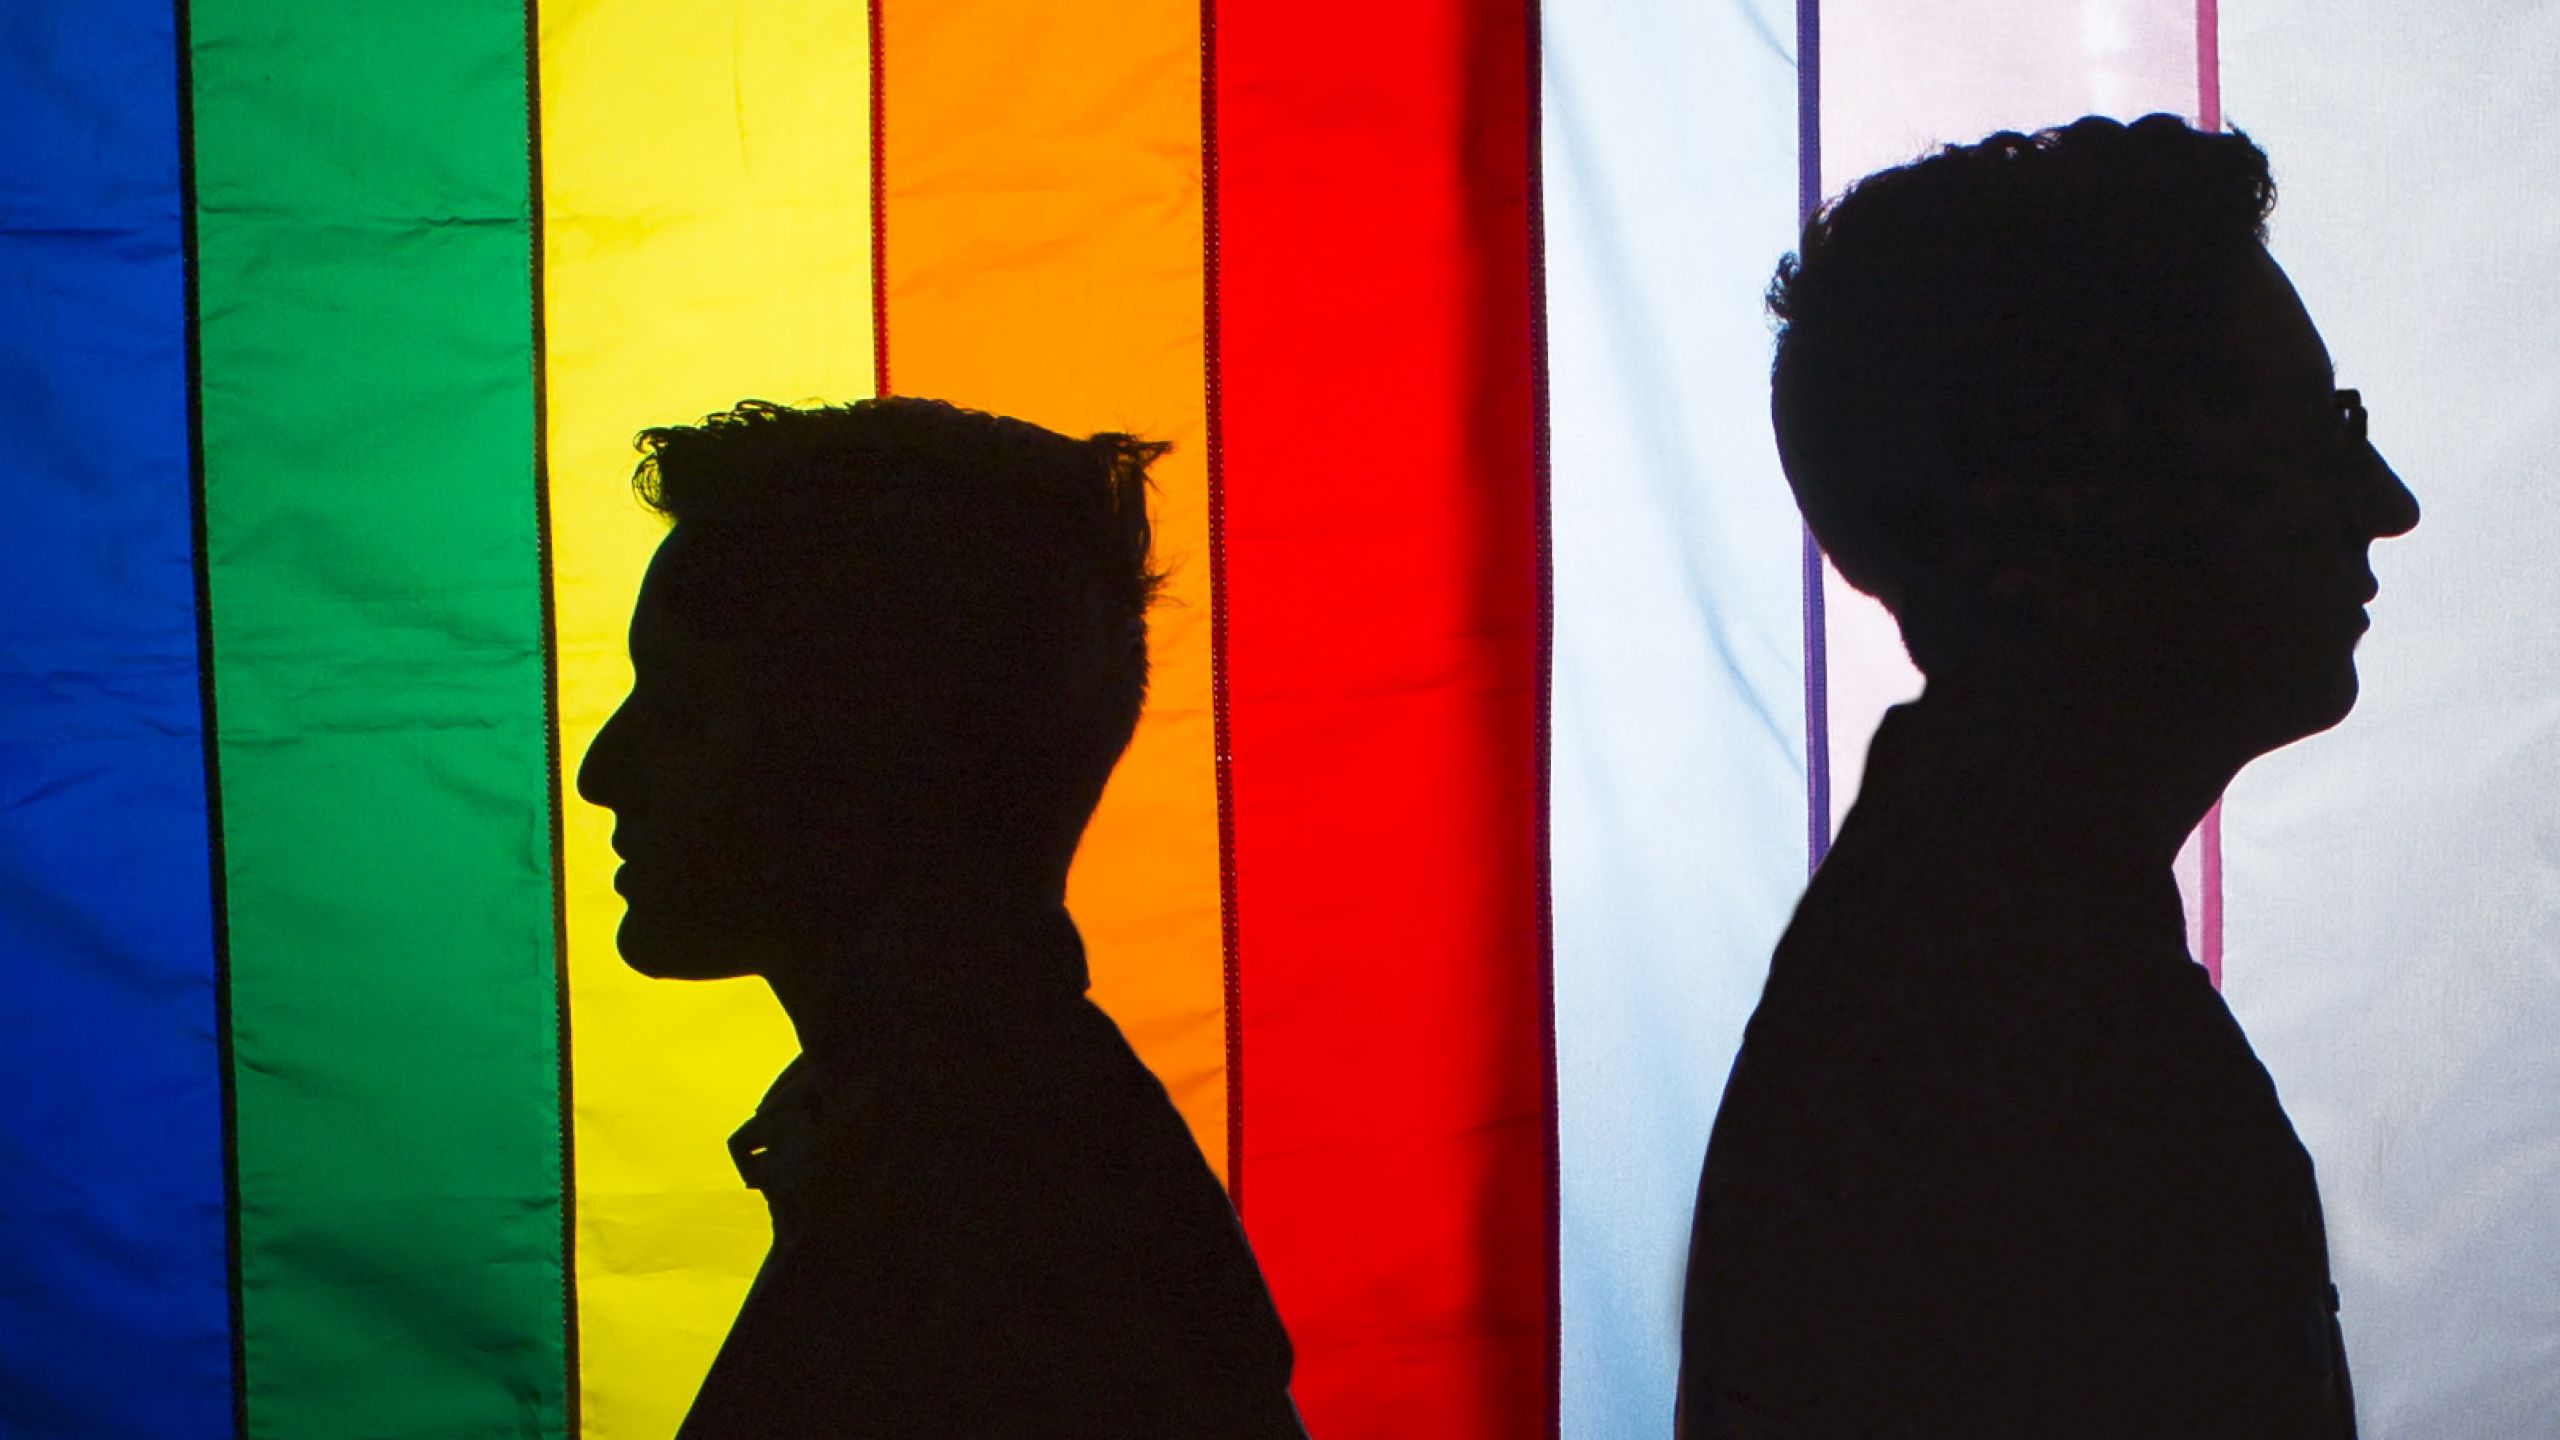 silhouette images with pride flag in background